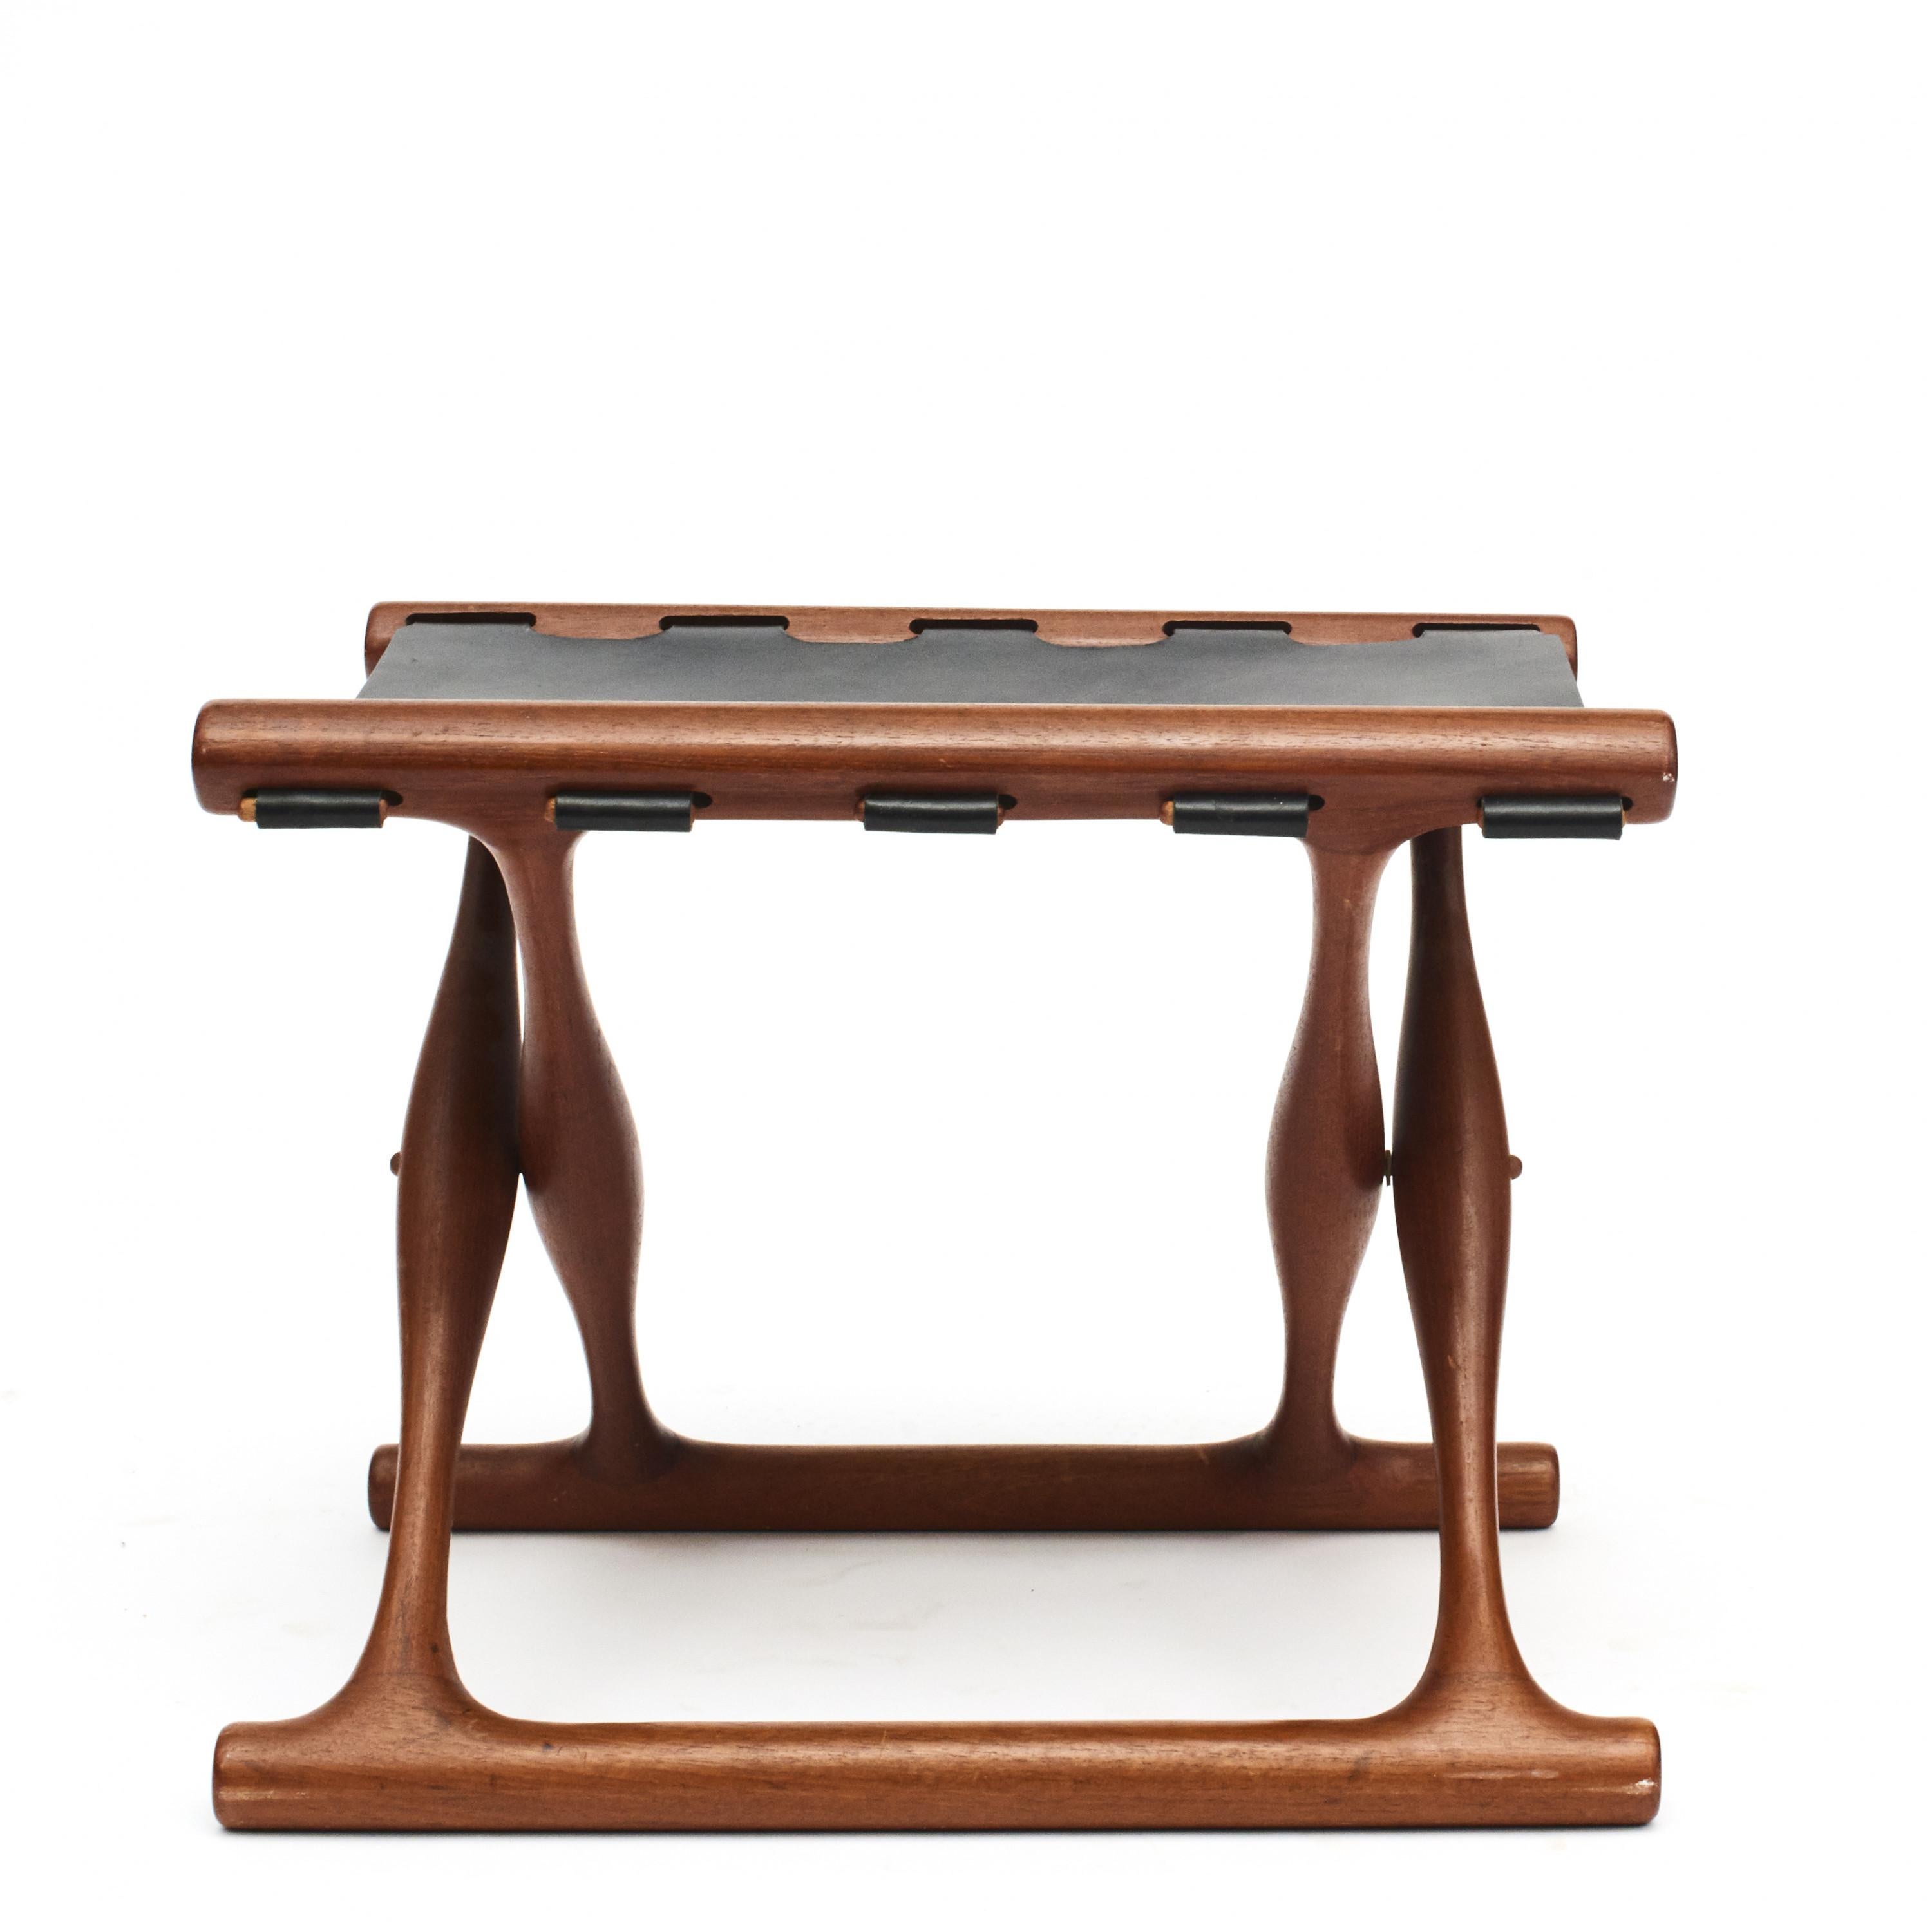 ”Gold Hill” Teak and Leather Folding Stool by Poul Hundevad 3